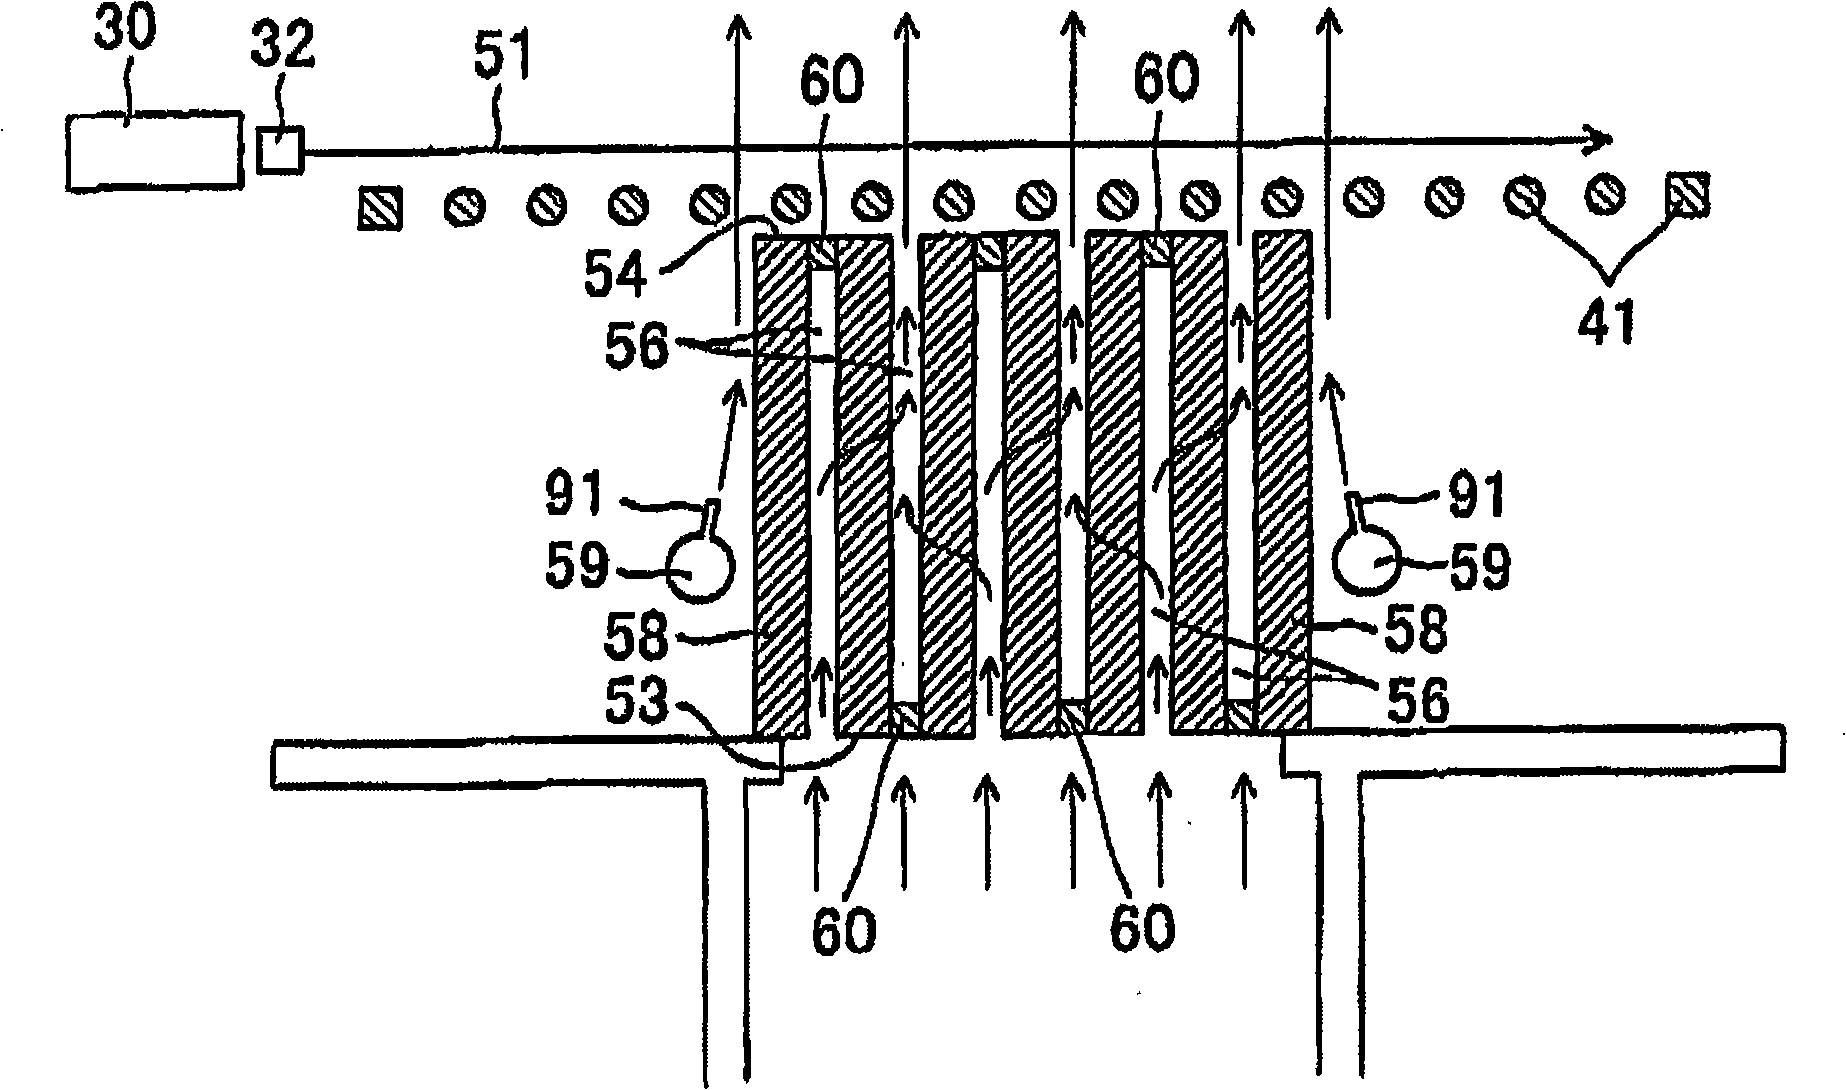 Apparatus for inspecting honeycomb structures